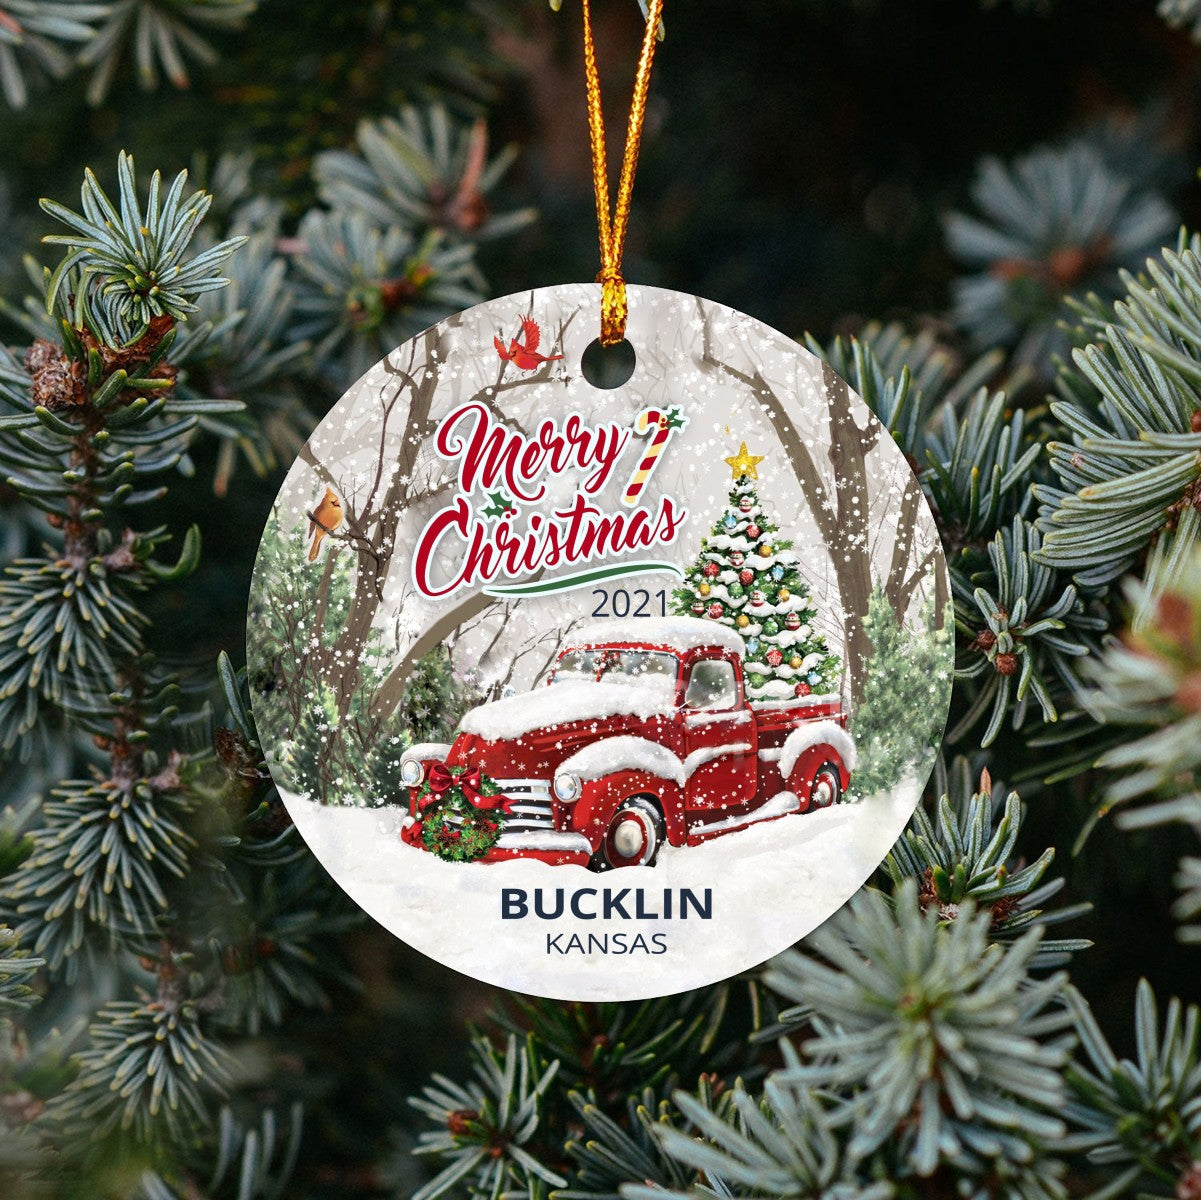 Christmas Tree Ornaments Bucklin - Ornament With Name City, State Bucklin Kansas KS Ornament - Red Truck Xmas Ornaments 3'' Plastic Gift For Family, Friend And Housewarming